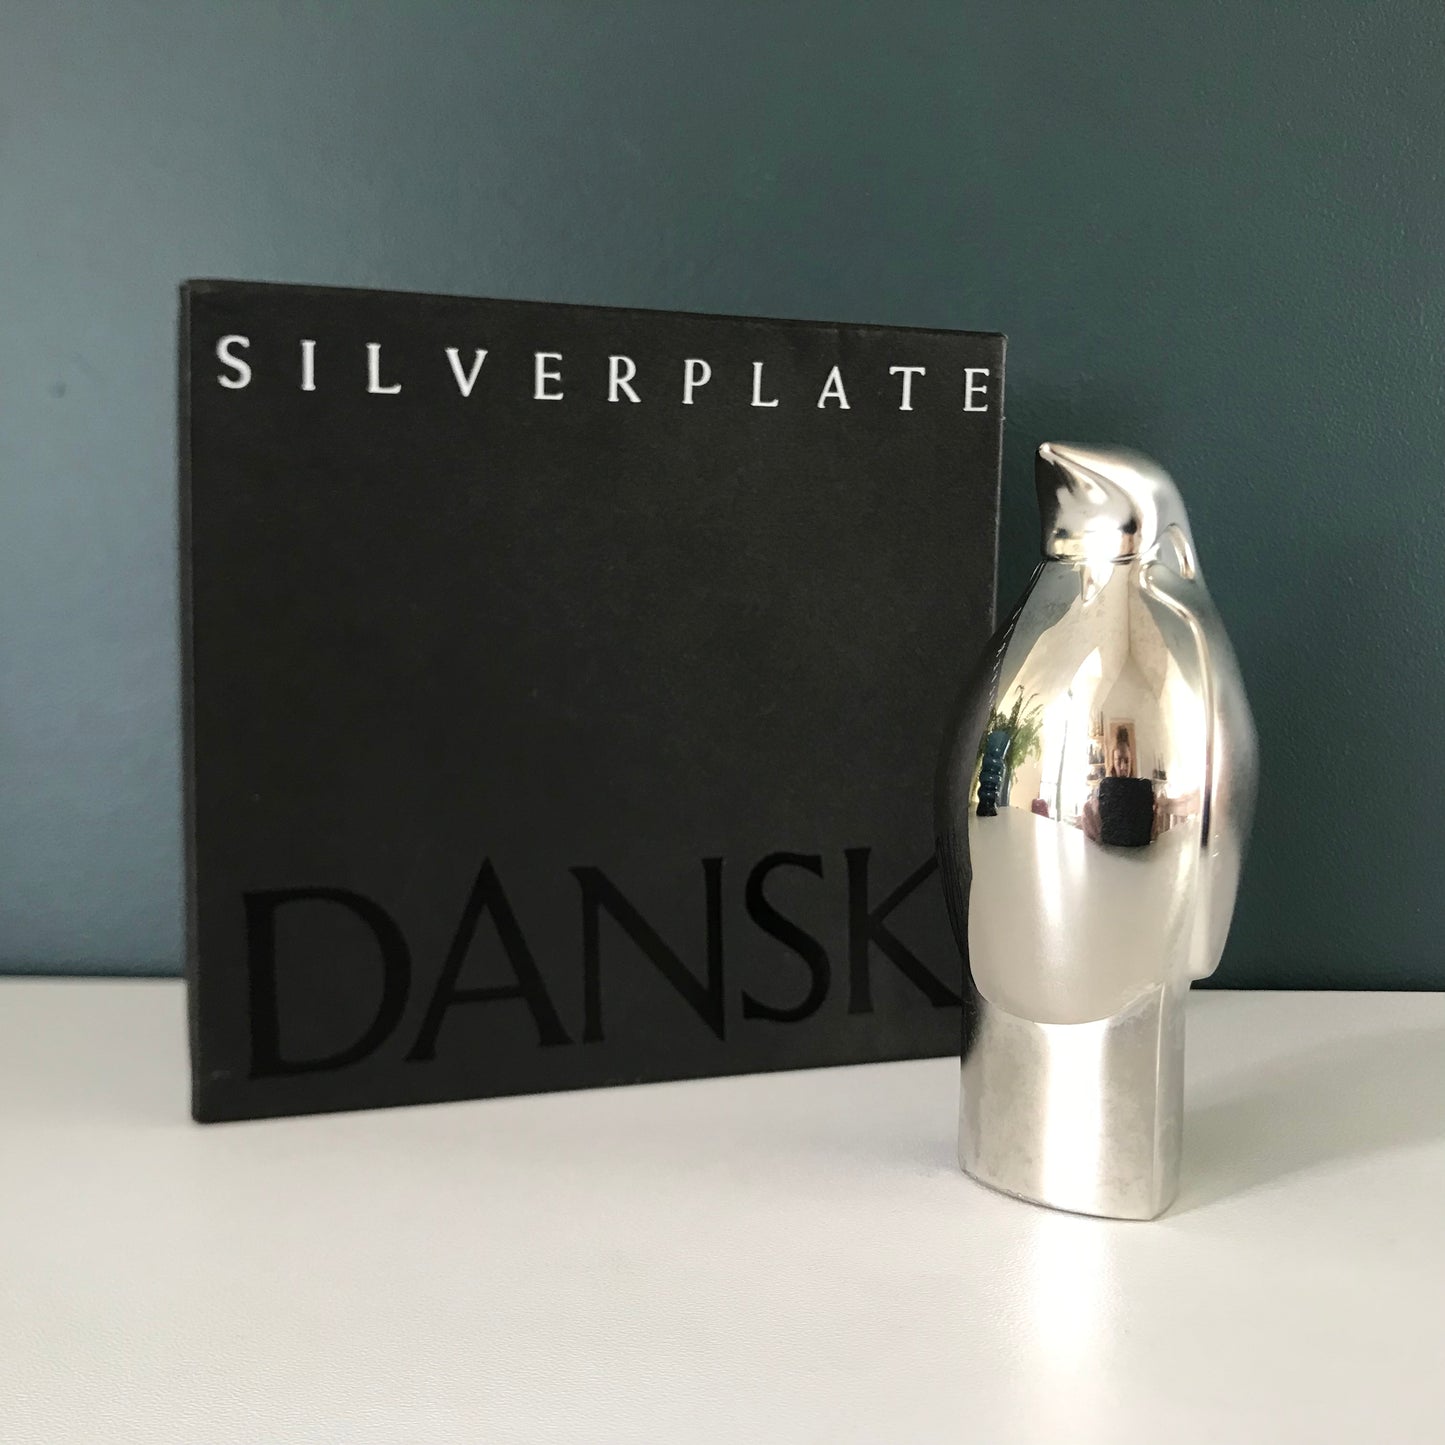 Boxed Dansk Designs Silver Penguin Paperweight Swedish Home Office Work Gift Present